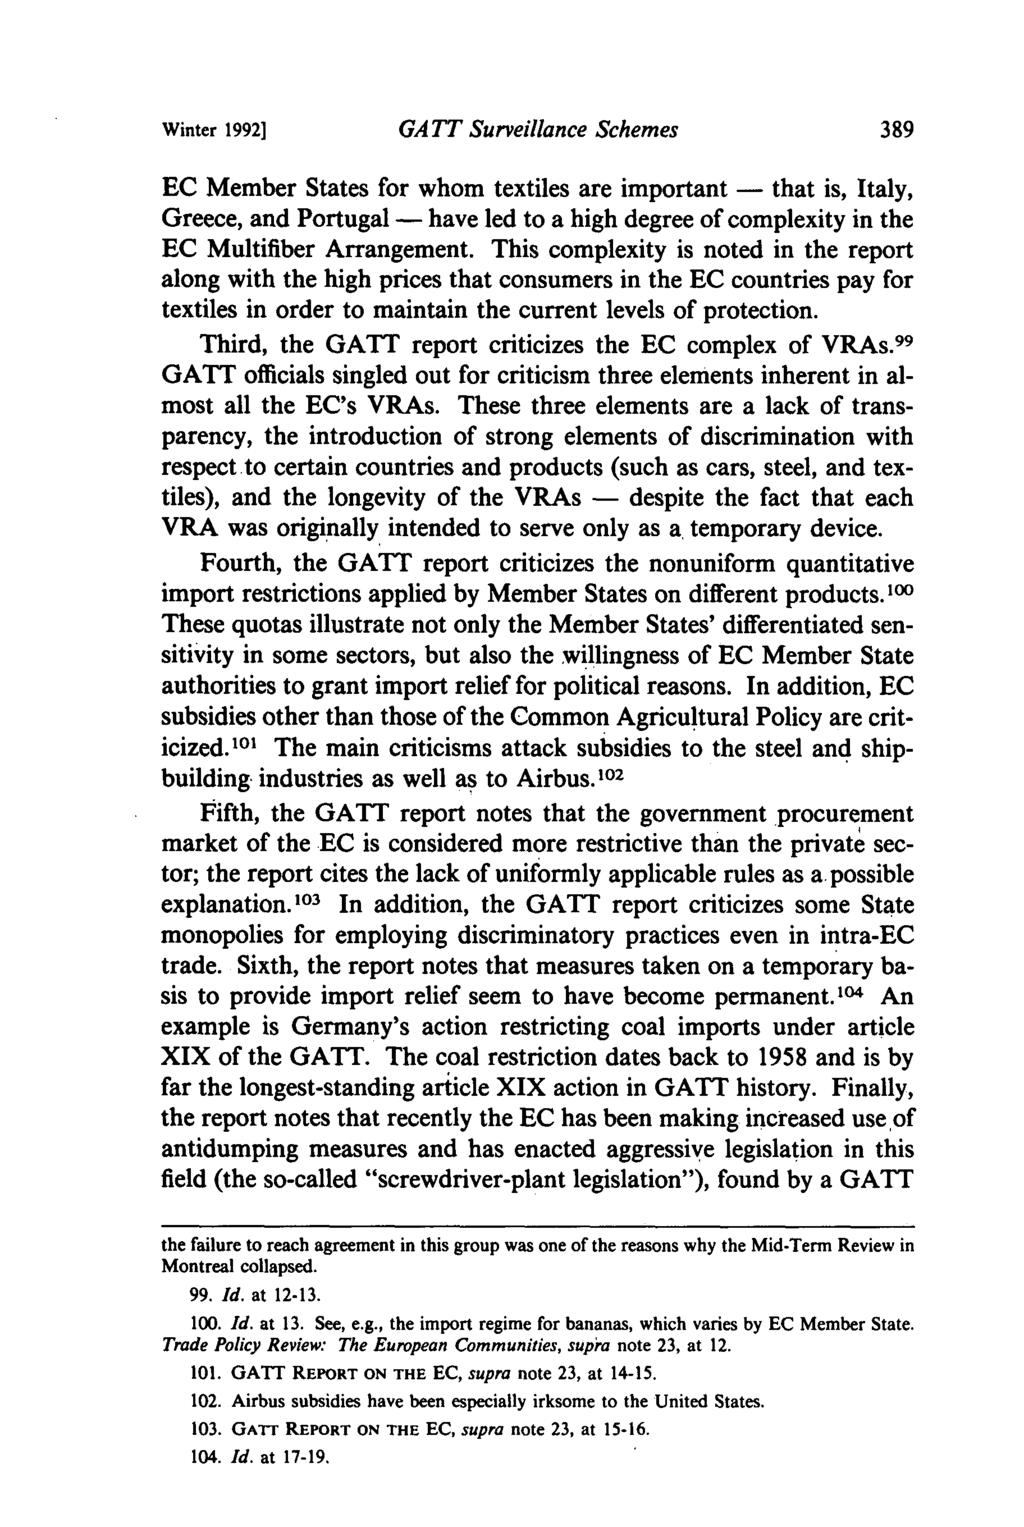 Winter 1992] GA TT Surveillance Schemes EC Member States for whom textiles are important - that is, Italy, Greece, and Portugal - have led to a high degree of complexity in the EC Multifiber